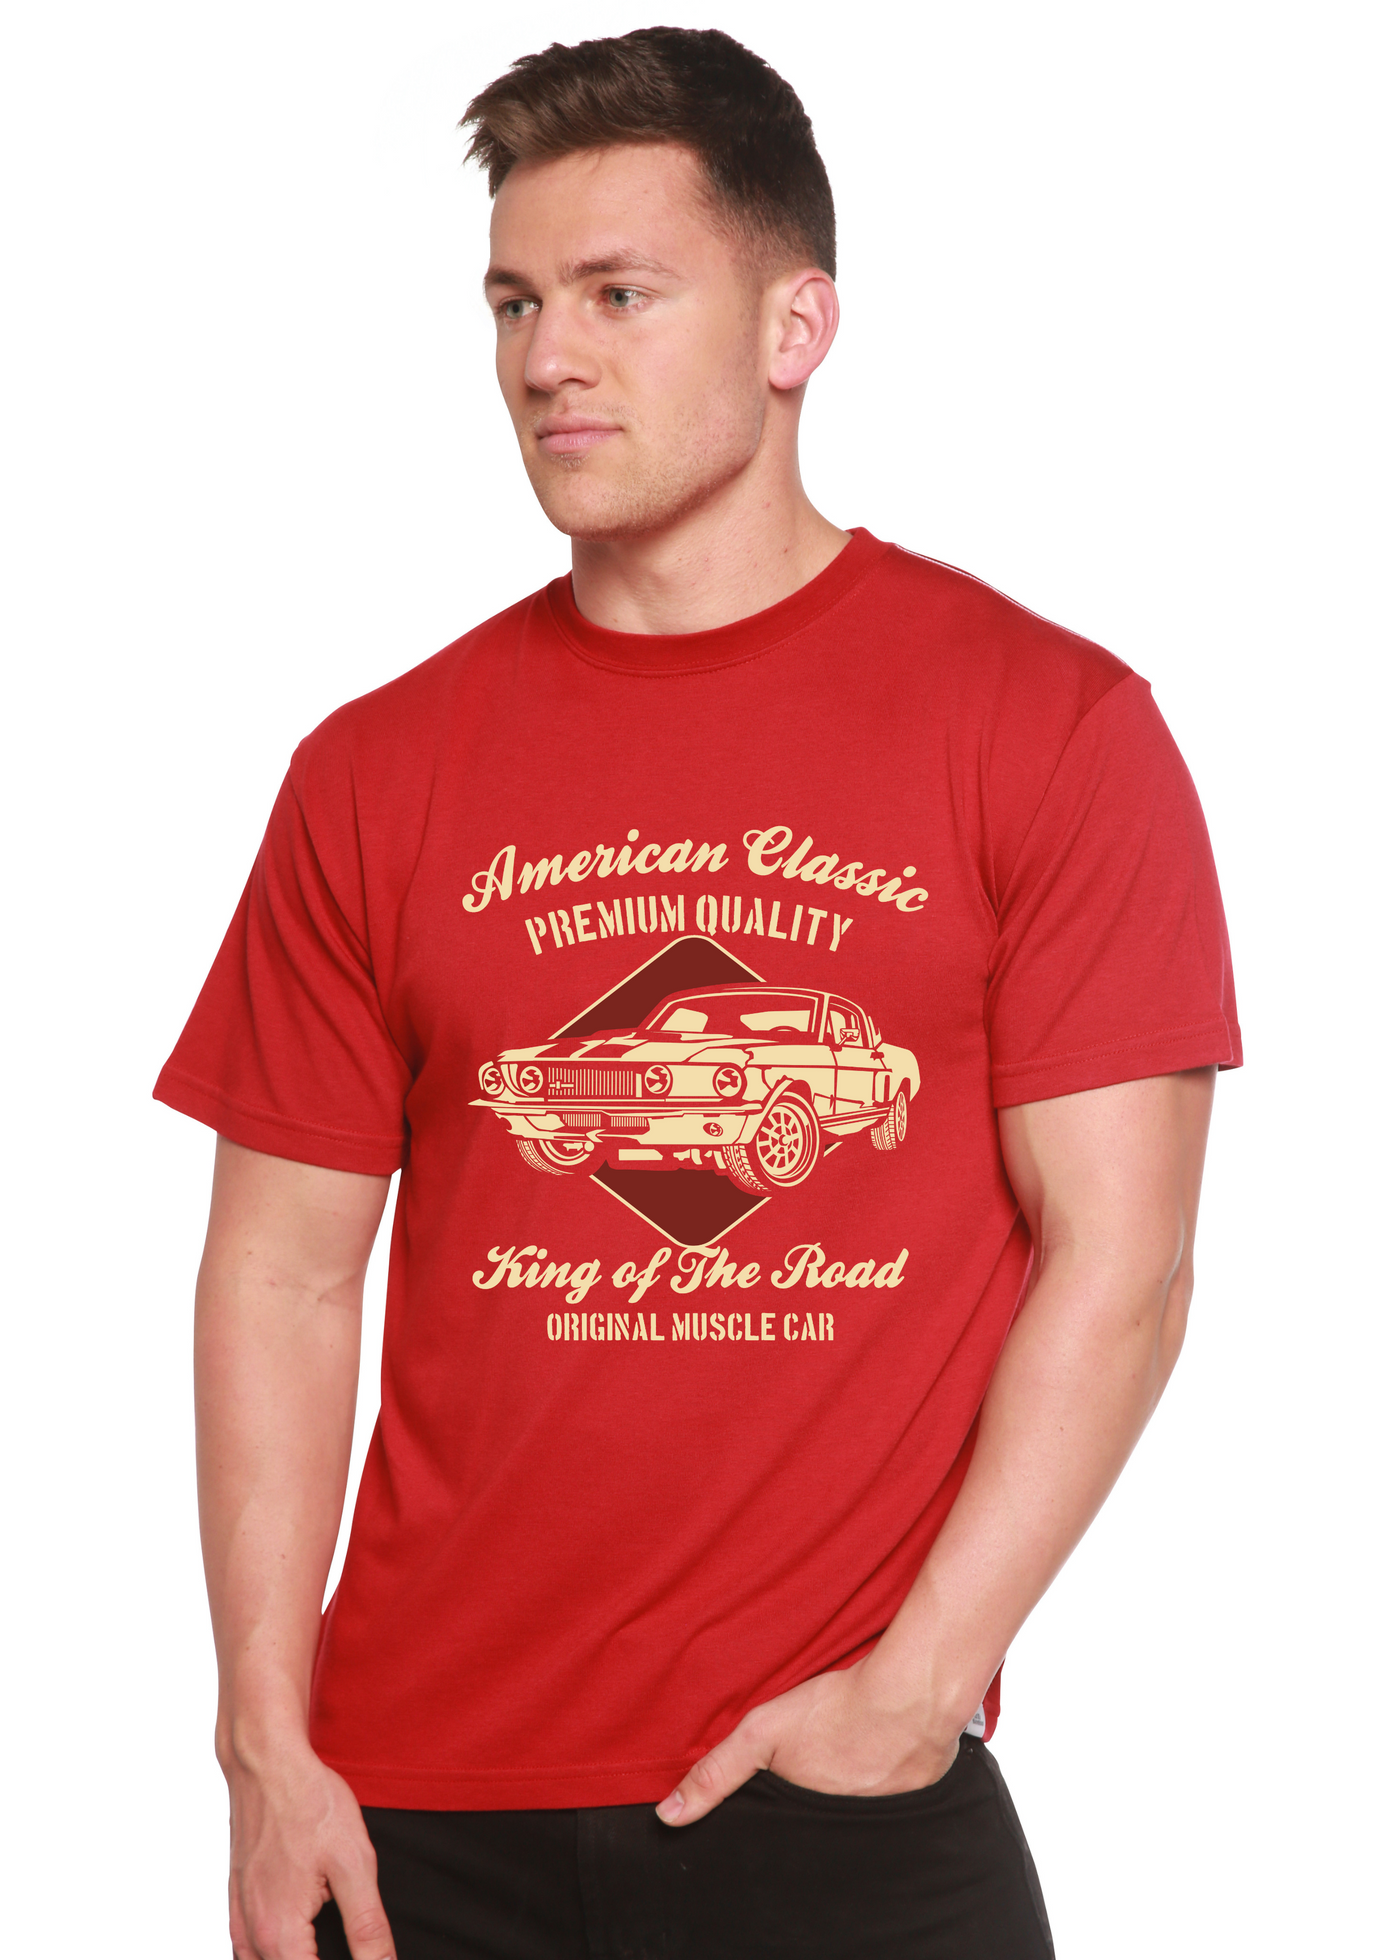 American Classic men's bamboo tshirt pompeian red